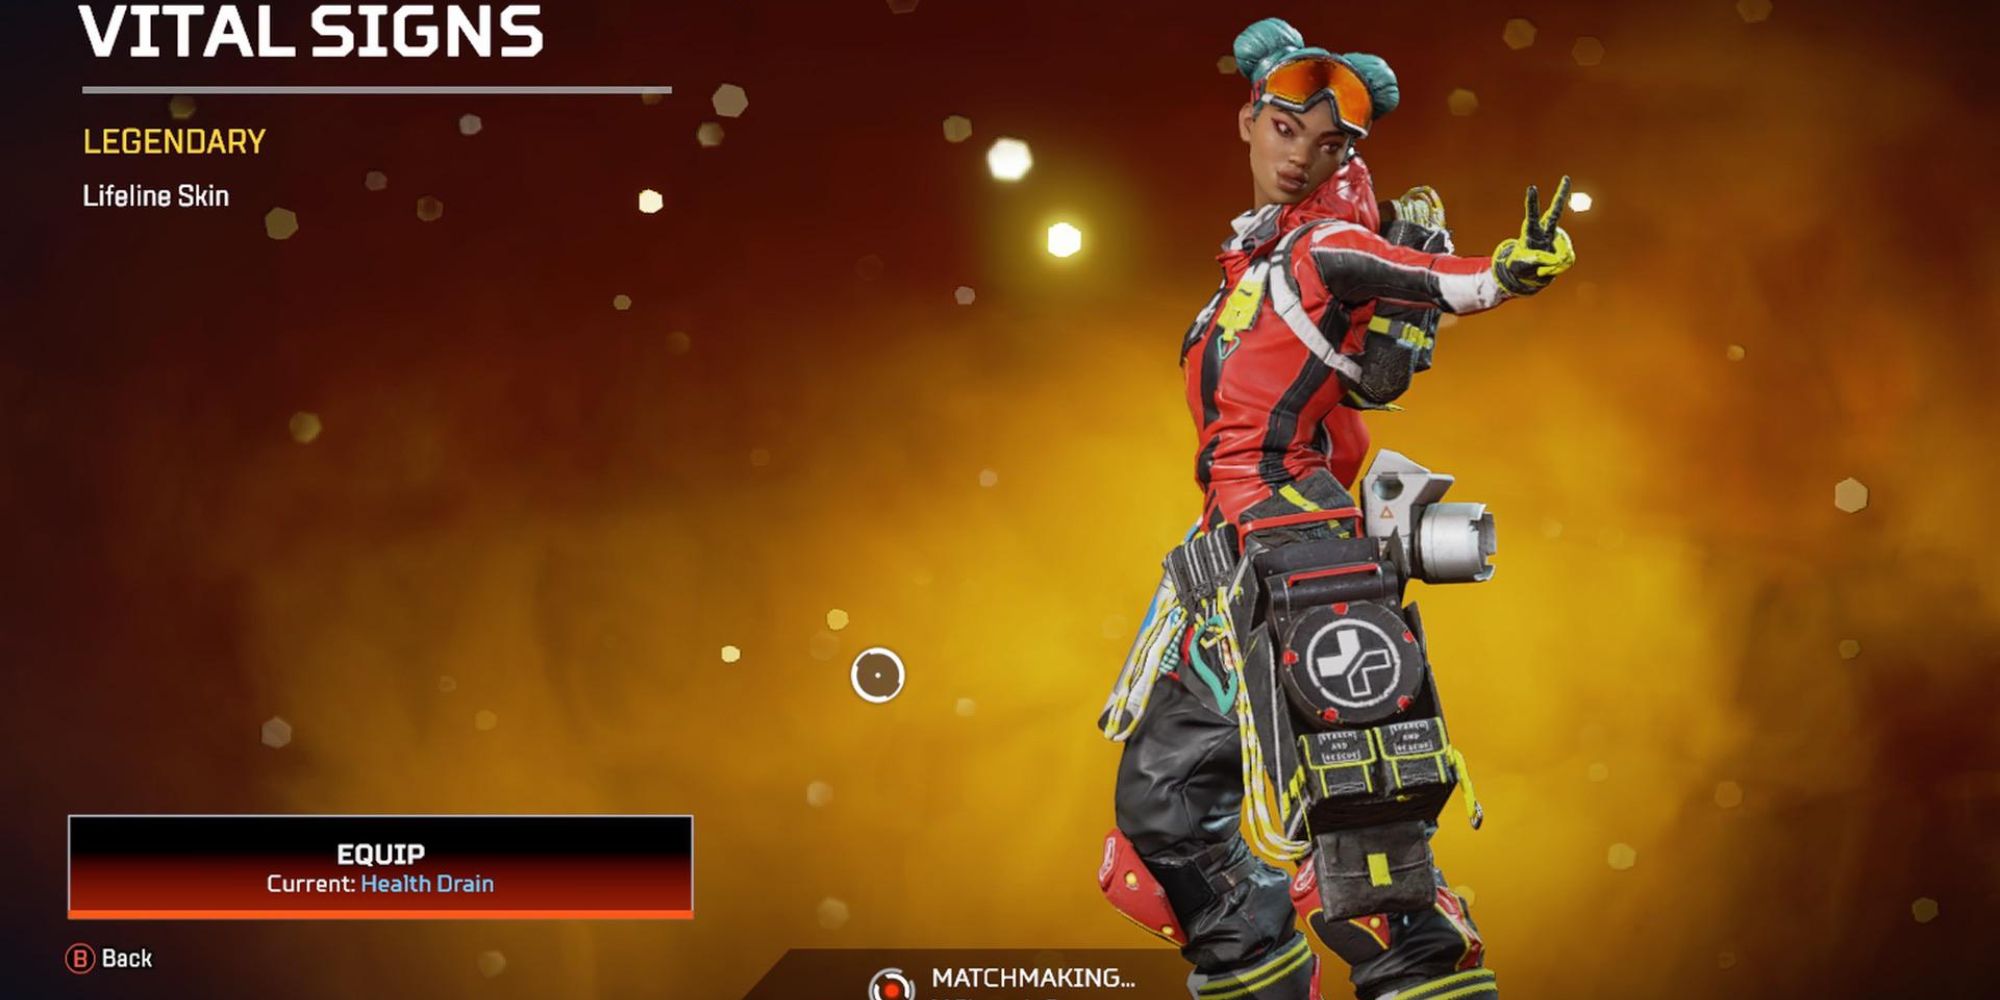 An image of Lifeline's Vital Signs skin from Apex Legends